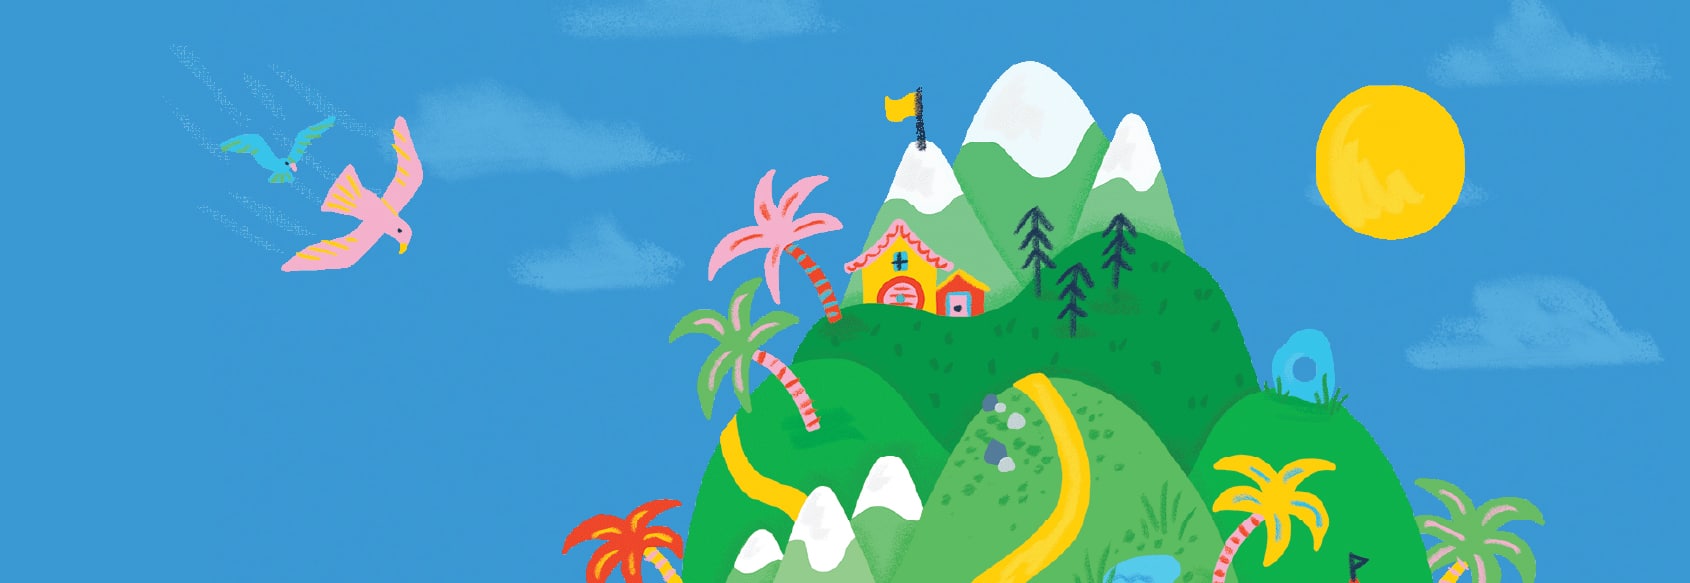 The colourful illustration used to promote Arthur's Club featuring green hills, mountains, palm trees and flying birds.